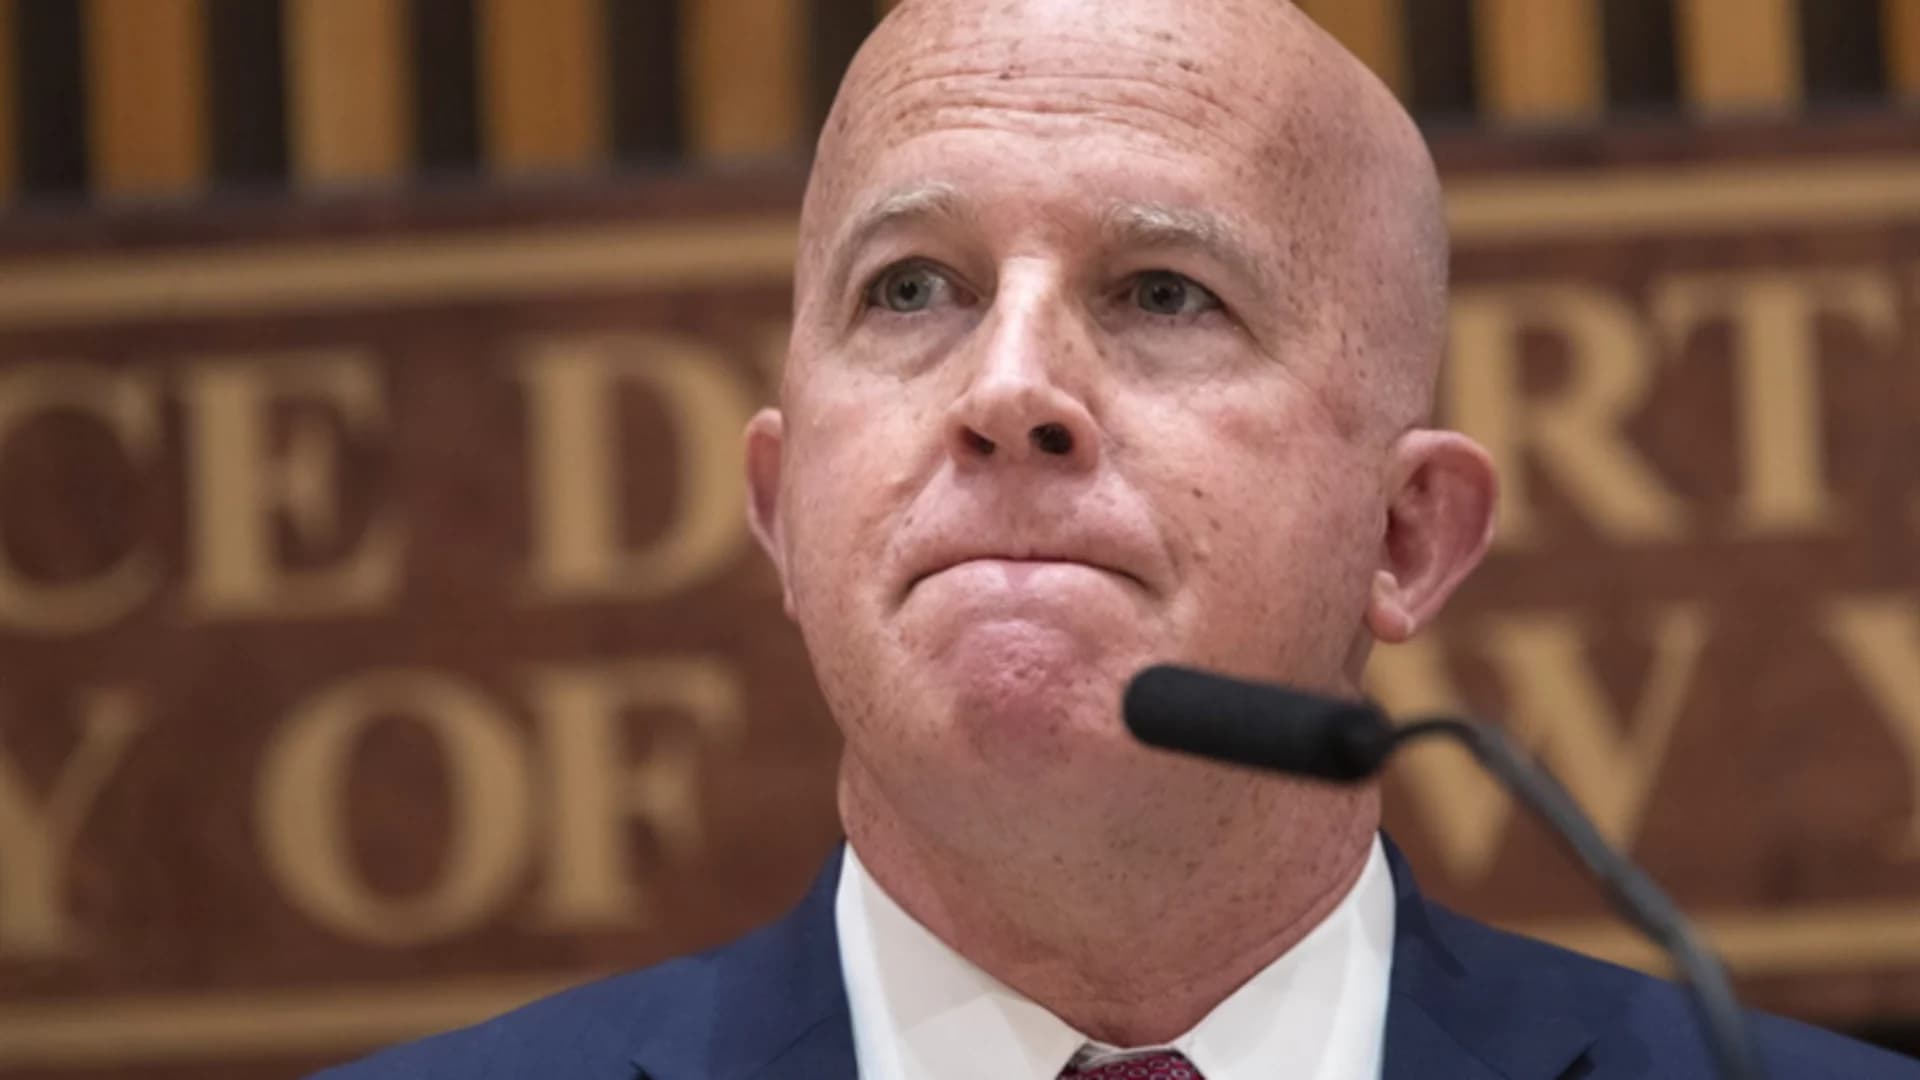 NYPD commissioner James O'Neill to step down